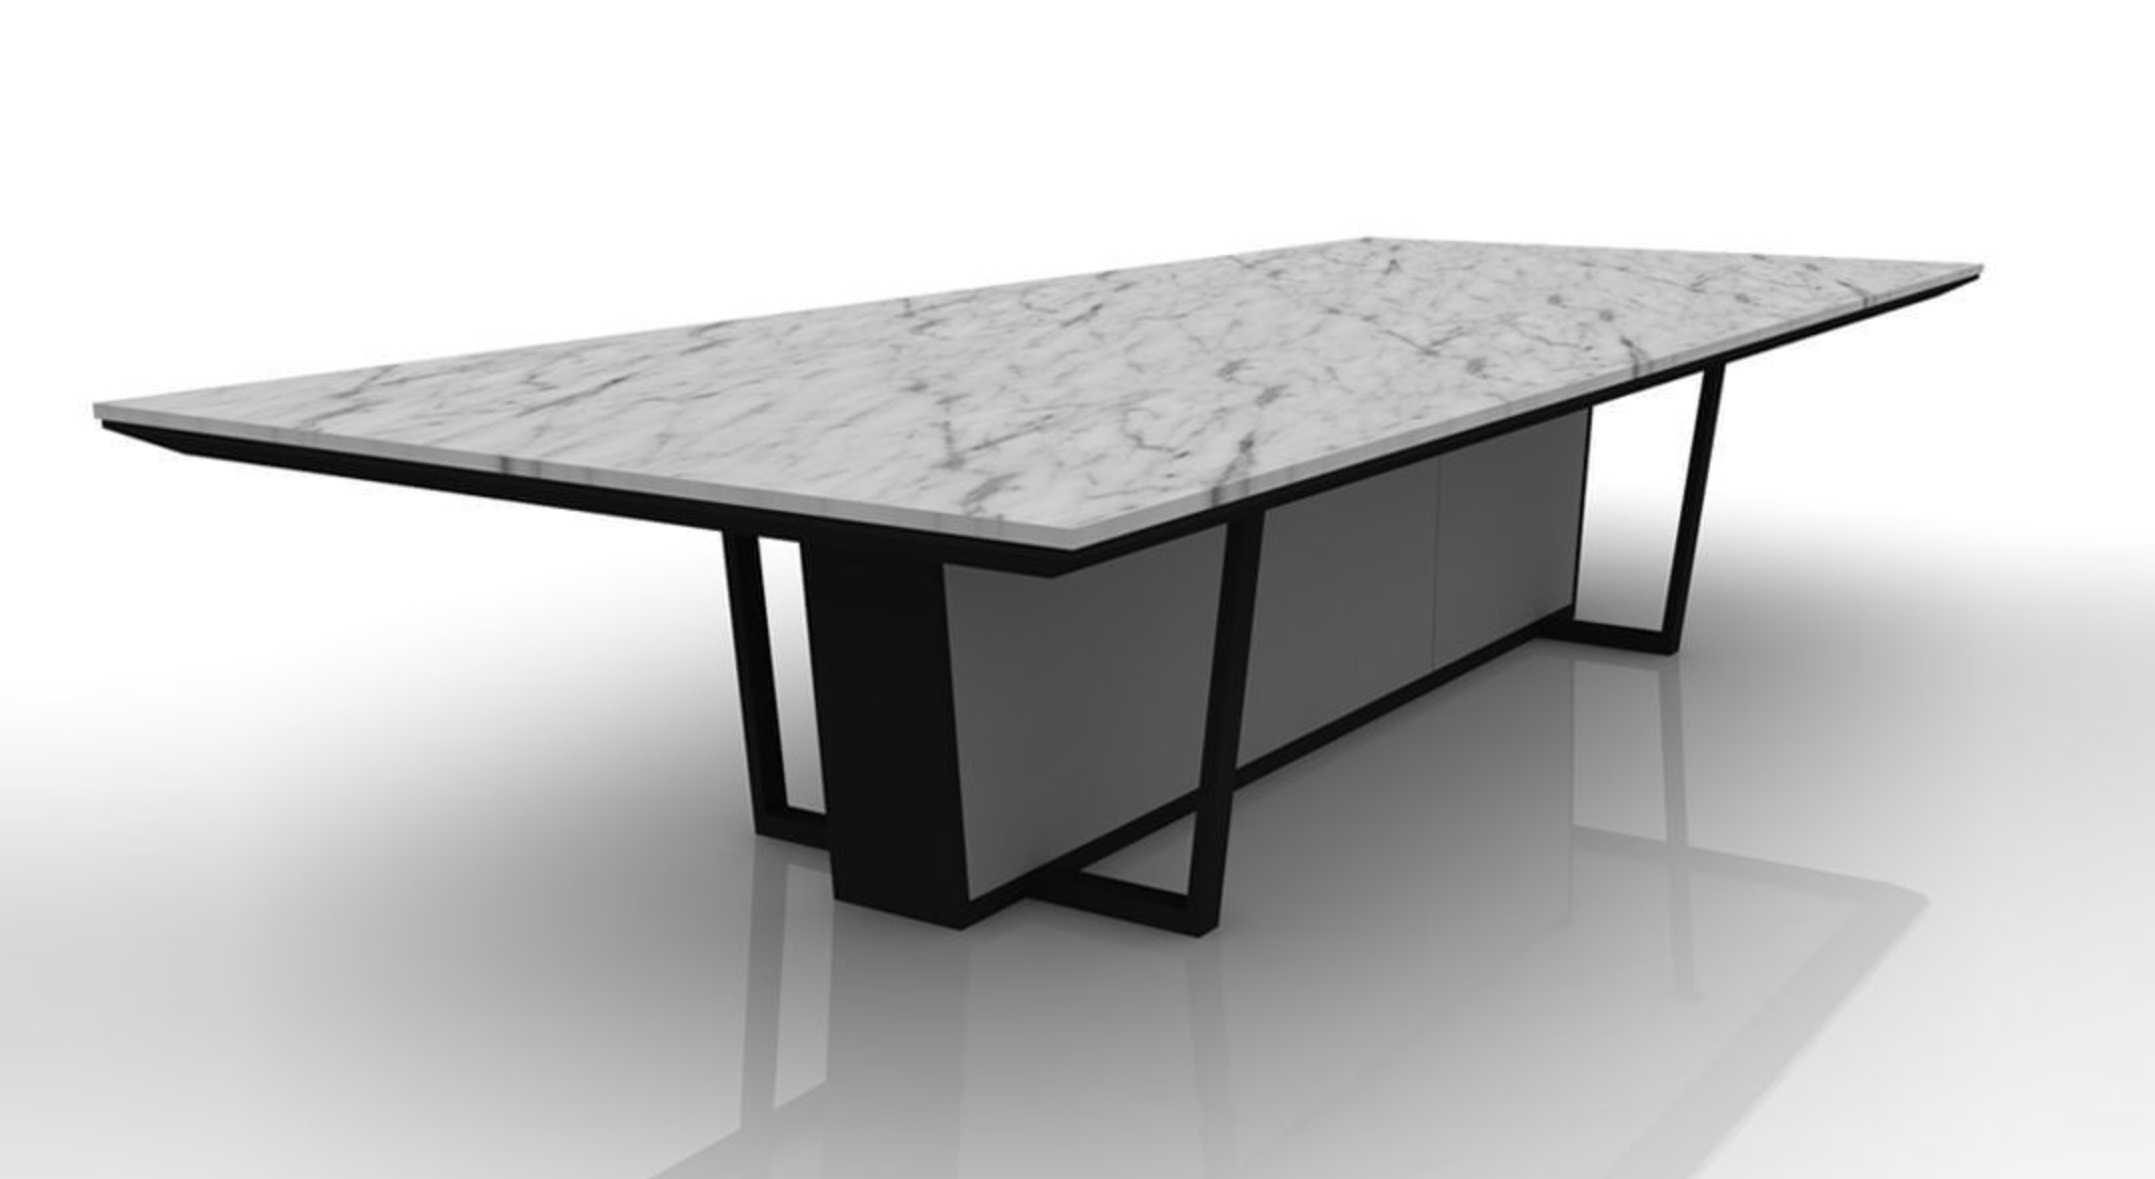 Luxurious carrara marble stone podium table for executive modern office spaces